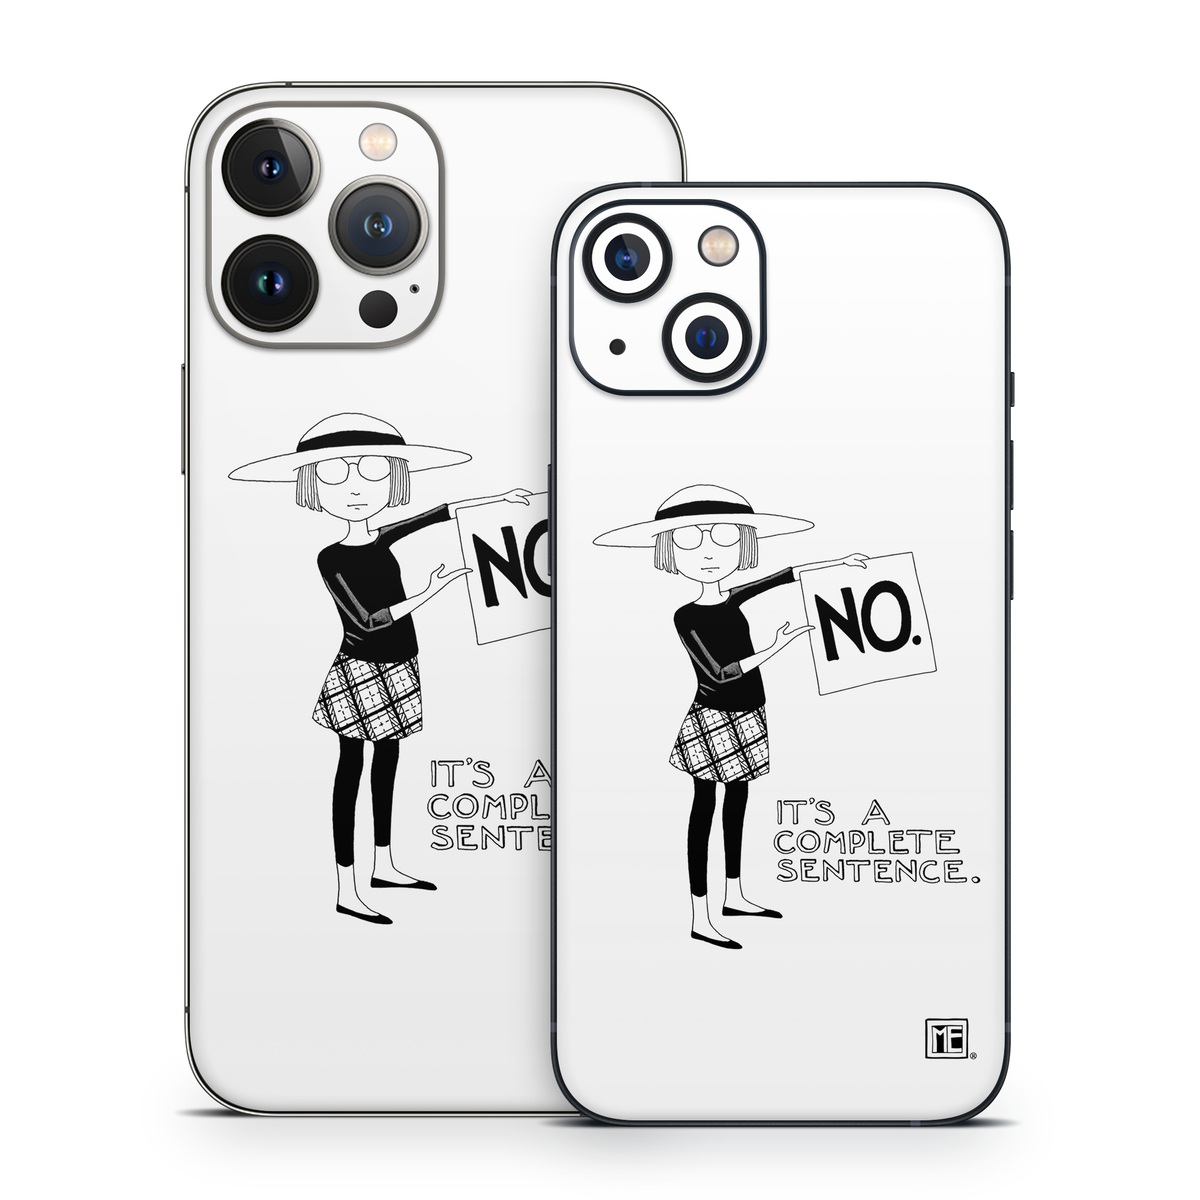 iPhone 13 Series Skin design of Cartoon, Illustration, Design, Font, Black-and-white, Pattern, Style, with white, black colors